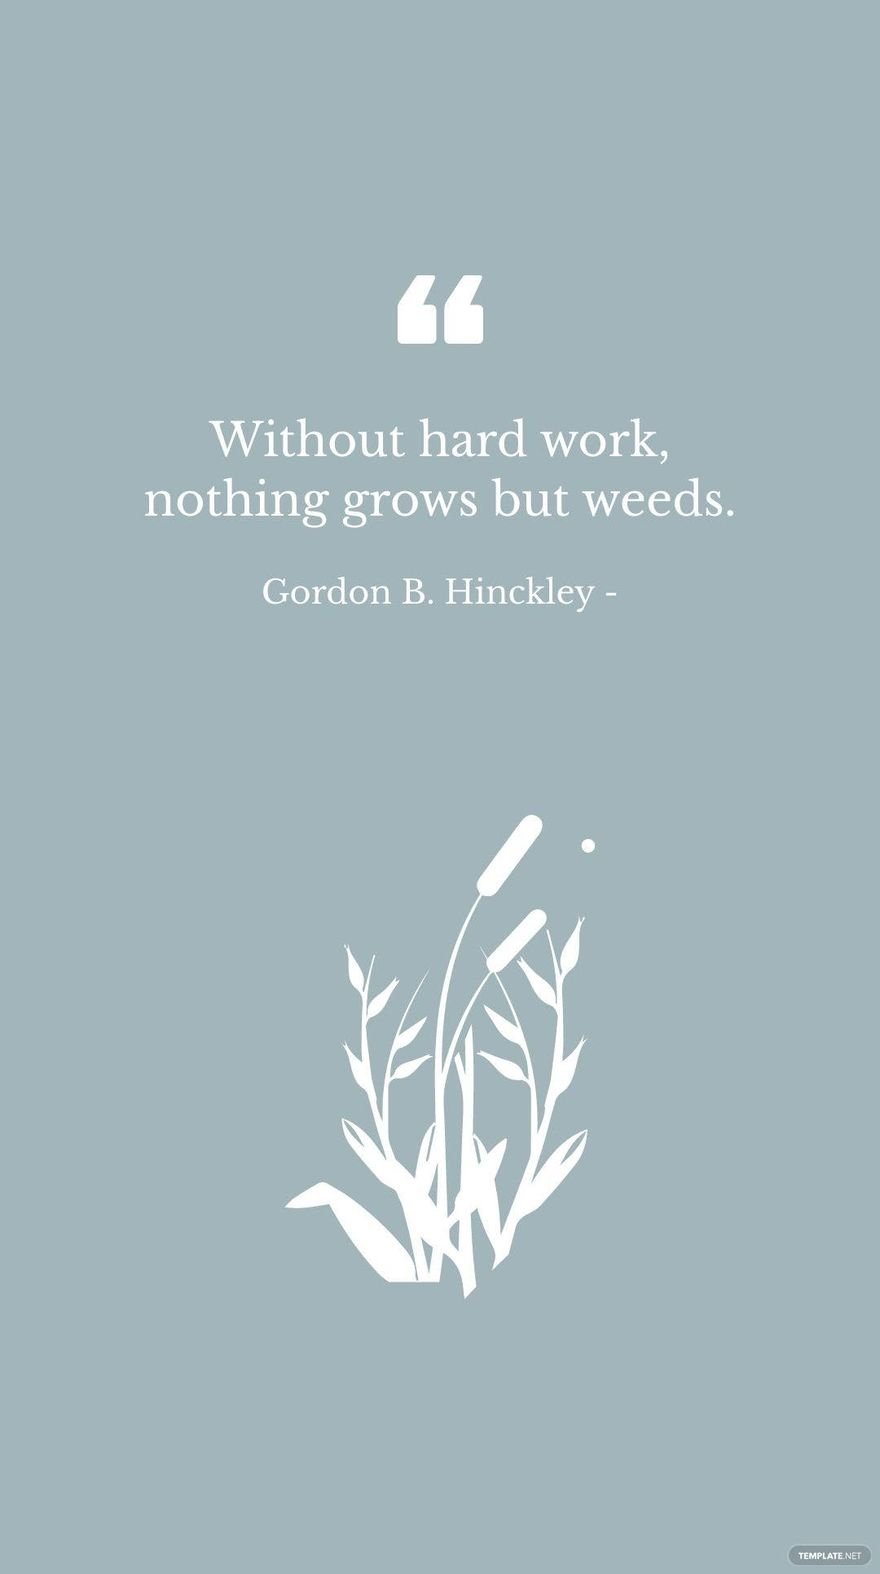 Gordon B. Hinckley - Without hard work, nothing grows but weeds.